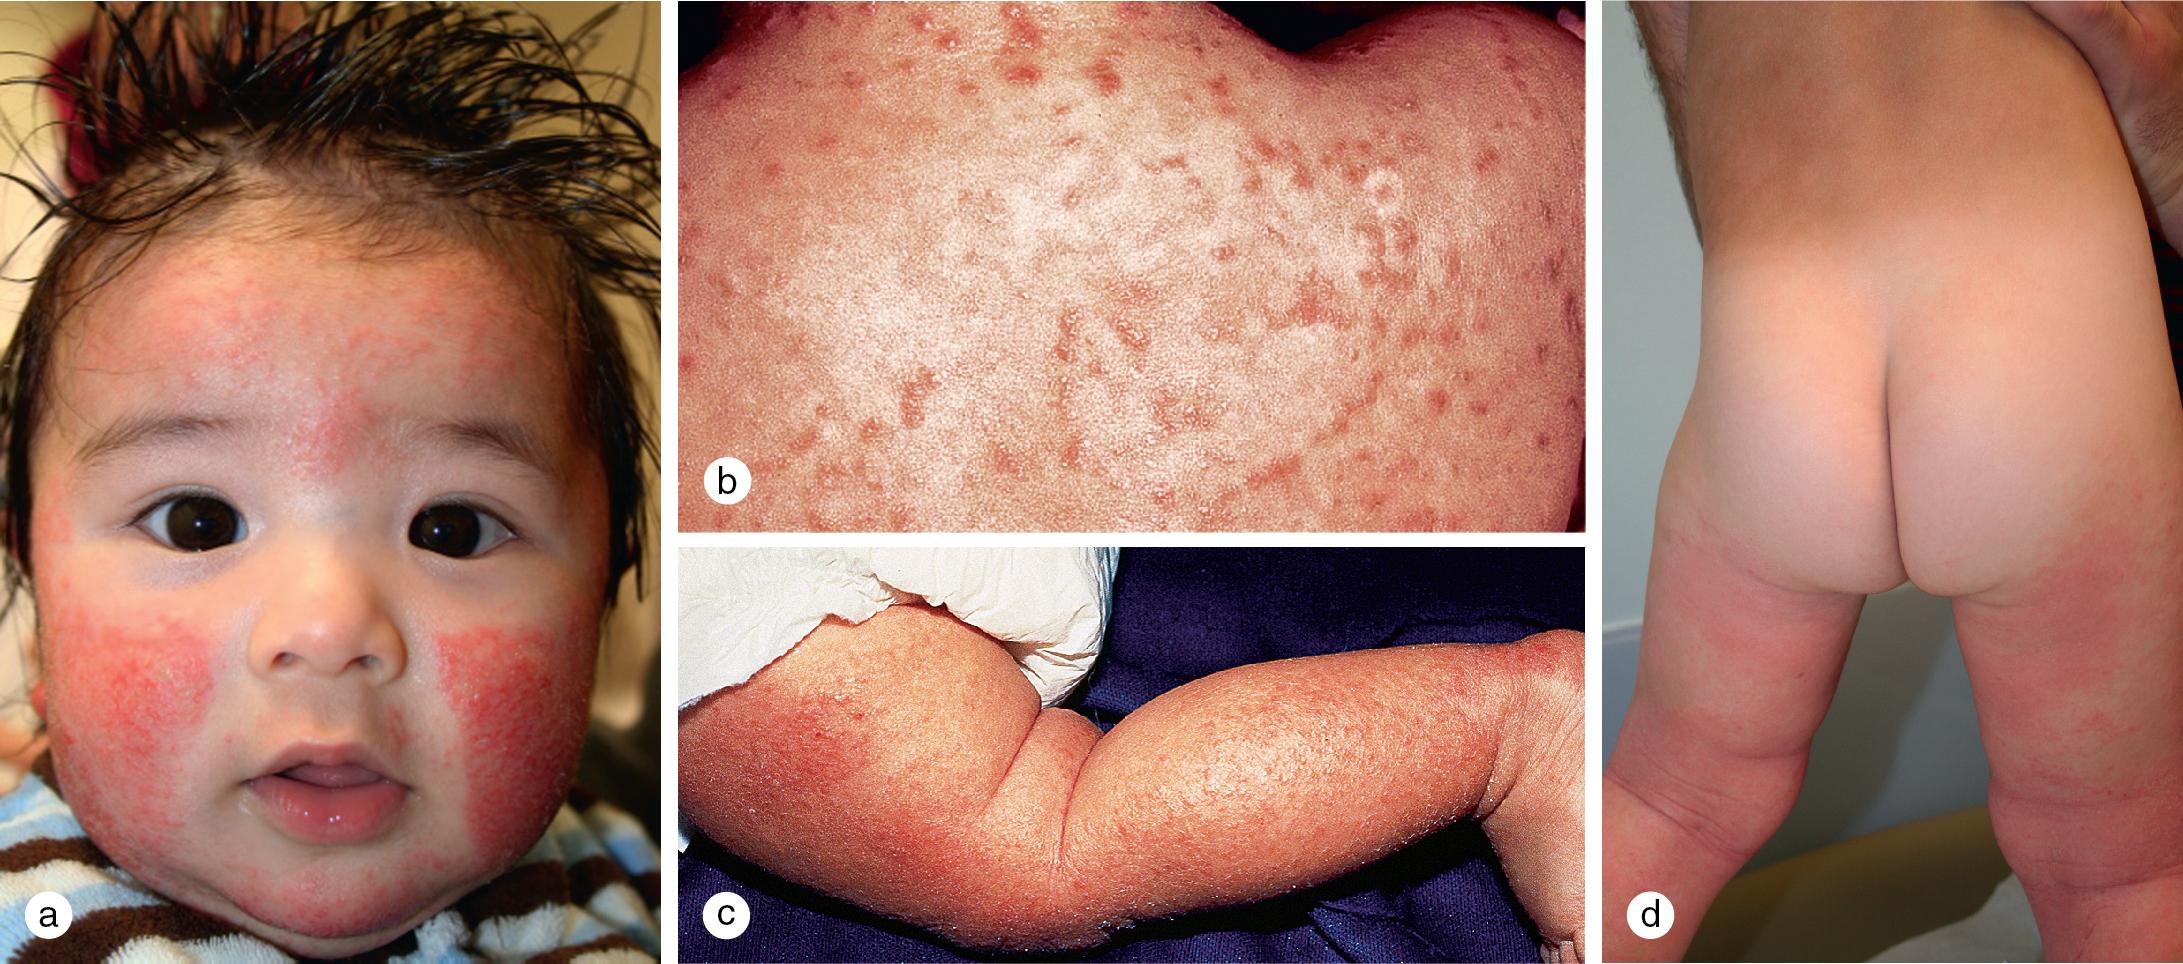 Fig. 3.20, Infantile eczema. (a) This infant has an acute, weeping dermatitis on the cheeks and forehead. Involvement of (b) the trunk and (c) the extremities with erythema, scaling, and crusting is evident. Note the severe involvement of the extensor surfaces of the leg and sparing of the leg crease. (d) Usually the diaper area is the only portion of the skin surface that is spared.